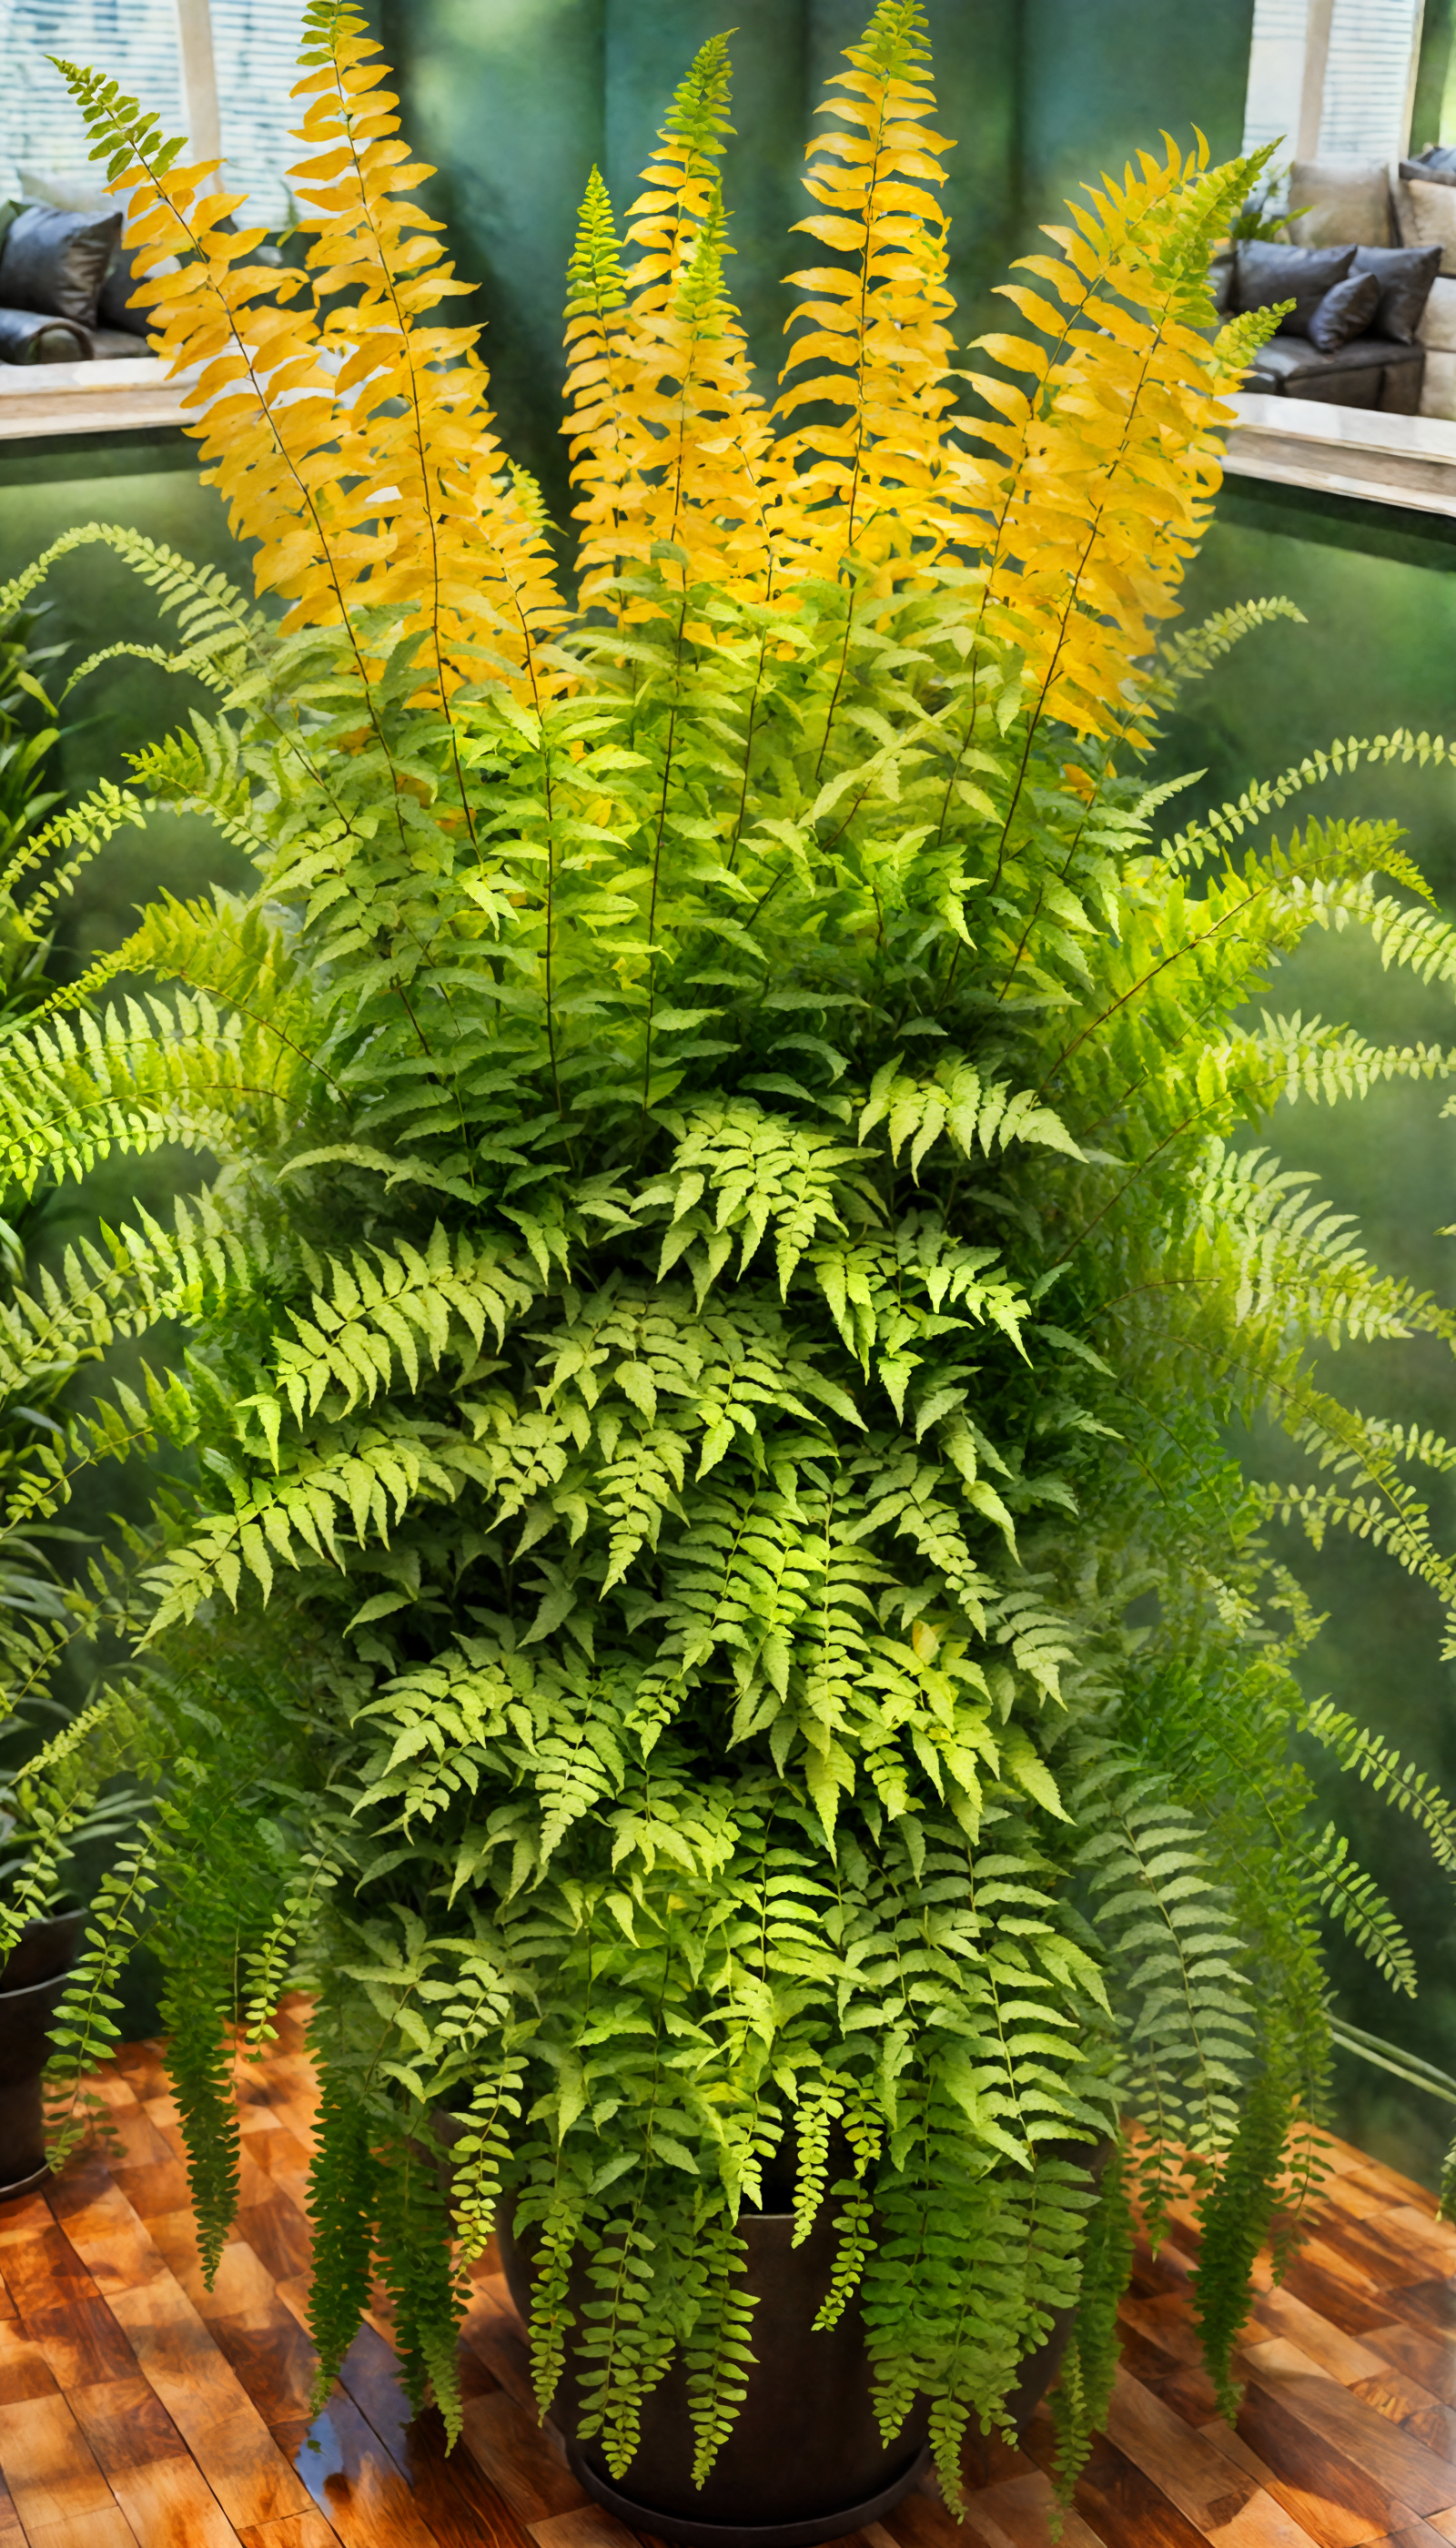 Lush Nephrolepis exaltata (Boston fern) in a rustic indoor setting with green and yellow decor.